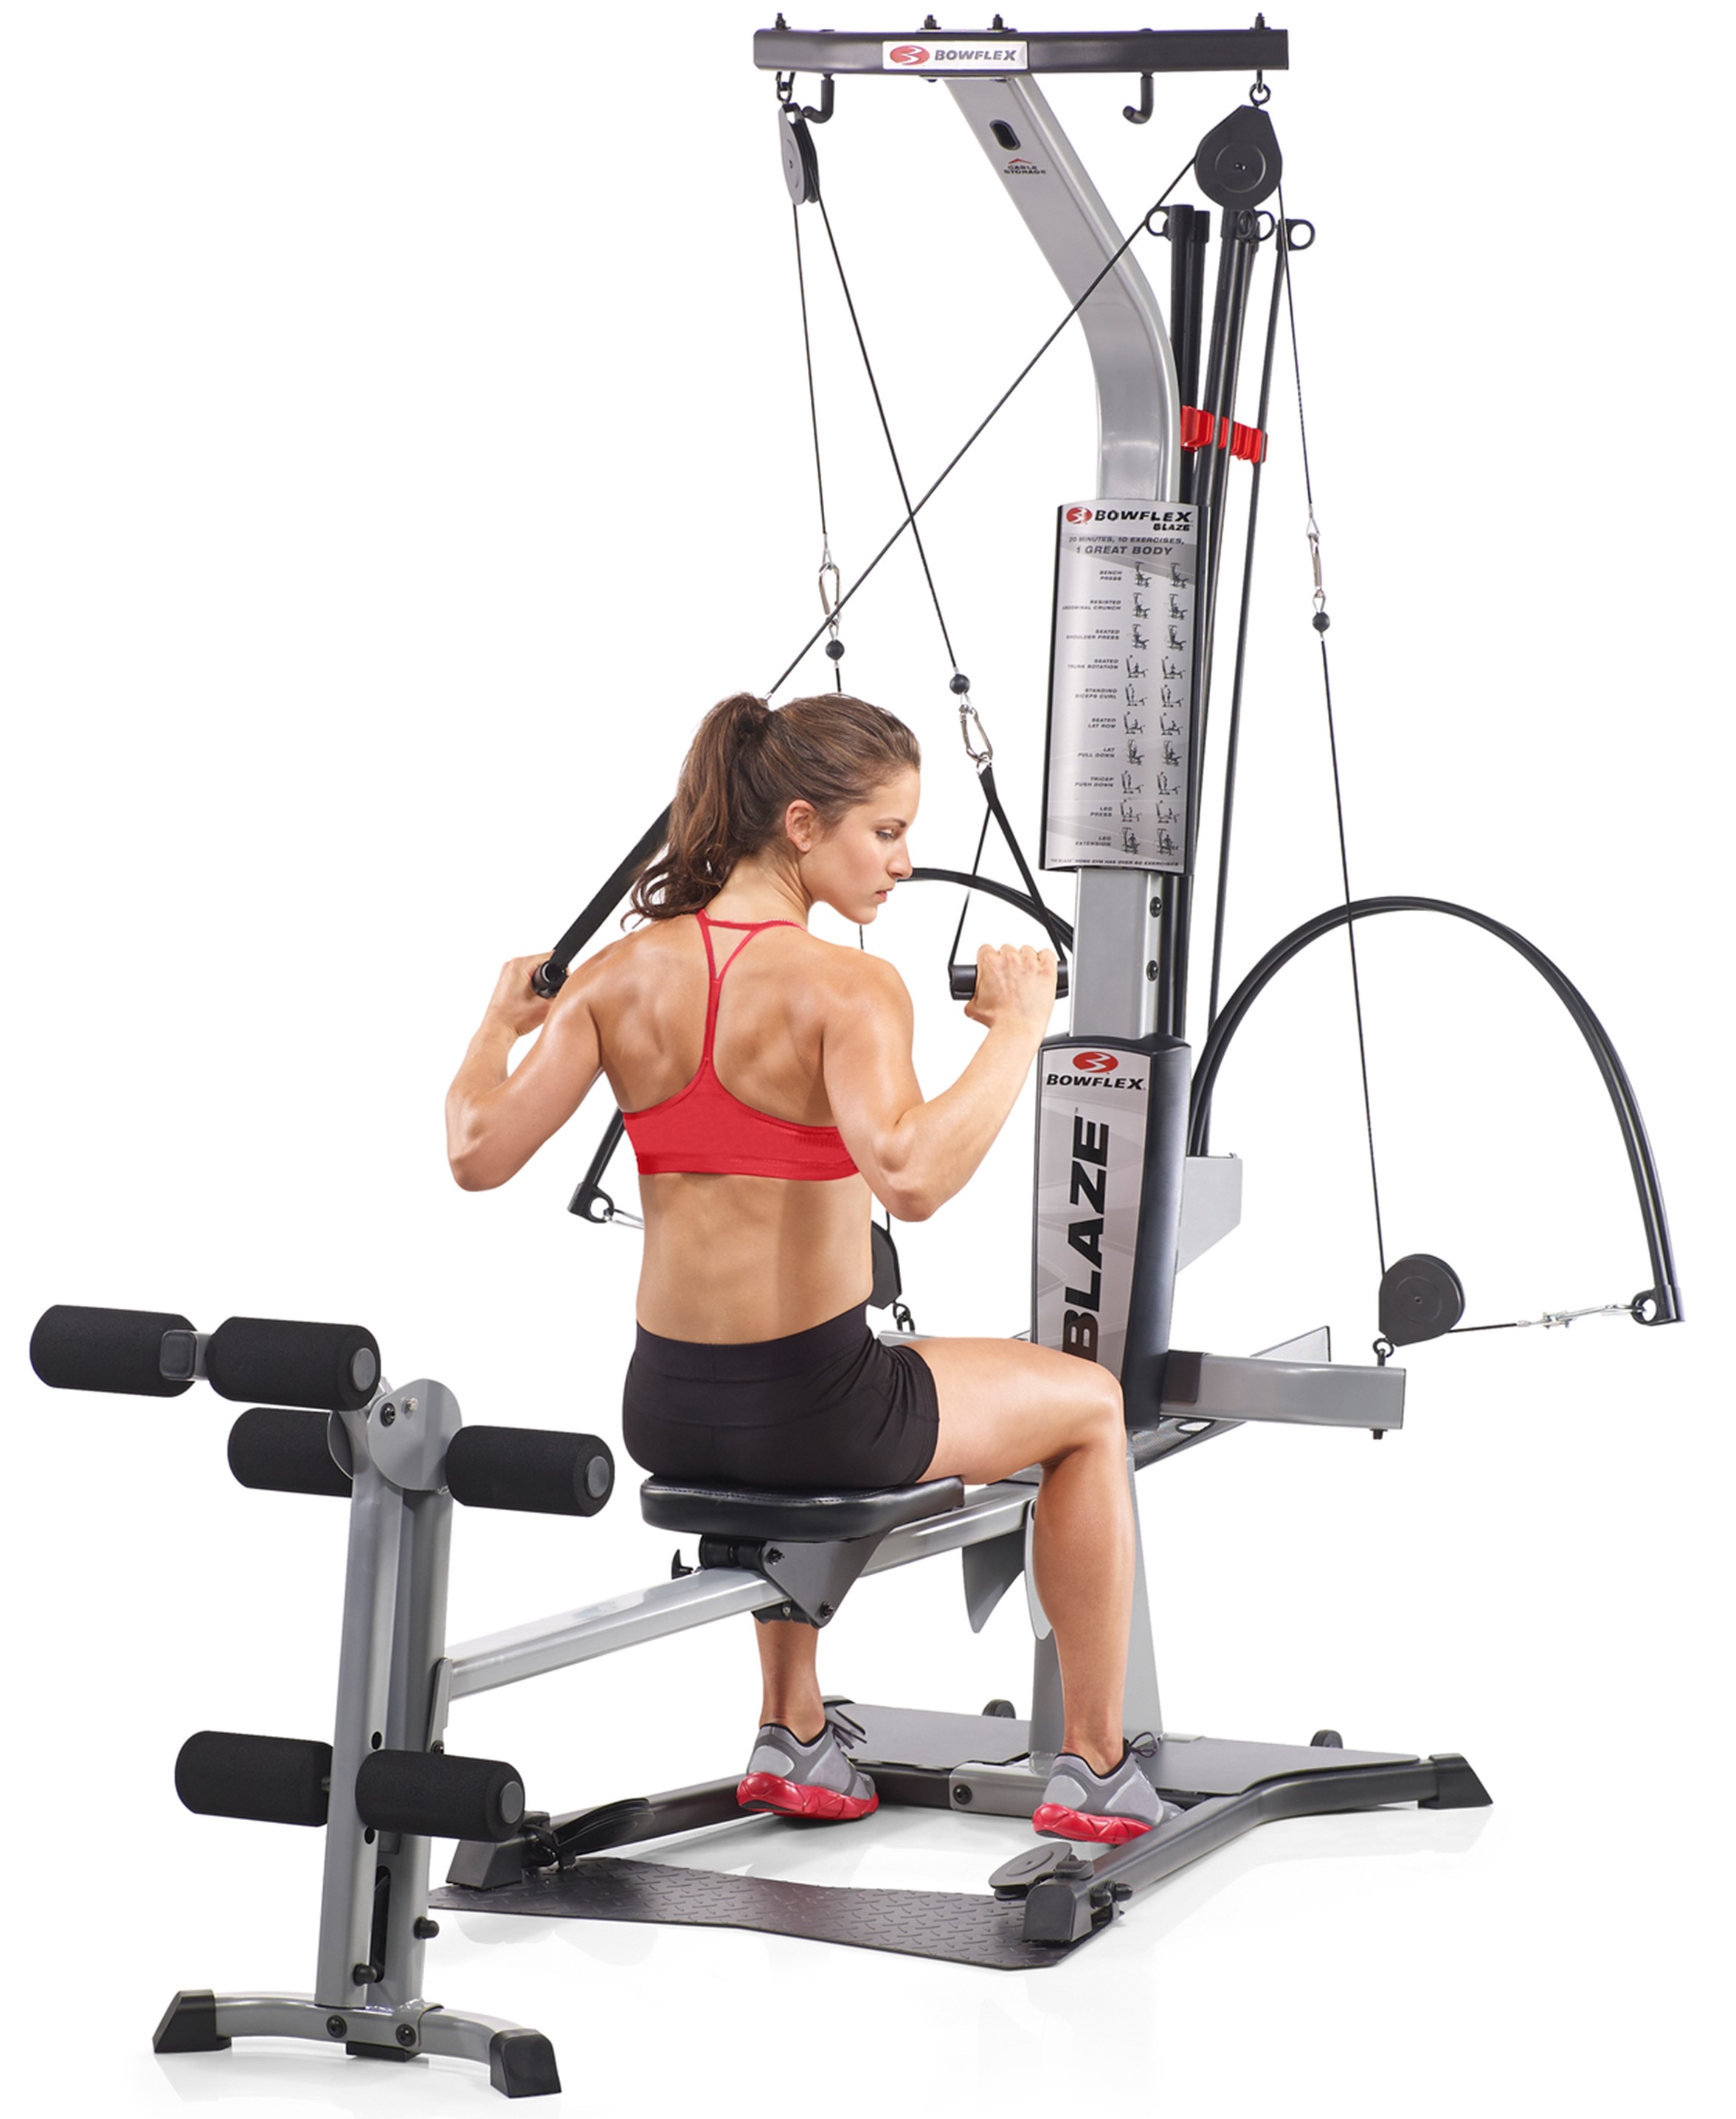 Bowflex Blaze Full Body Workout Machine for Home Gym with 210 Pound Resistance - image 7 of 11